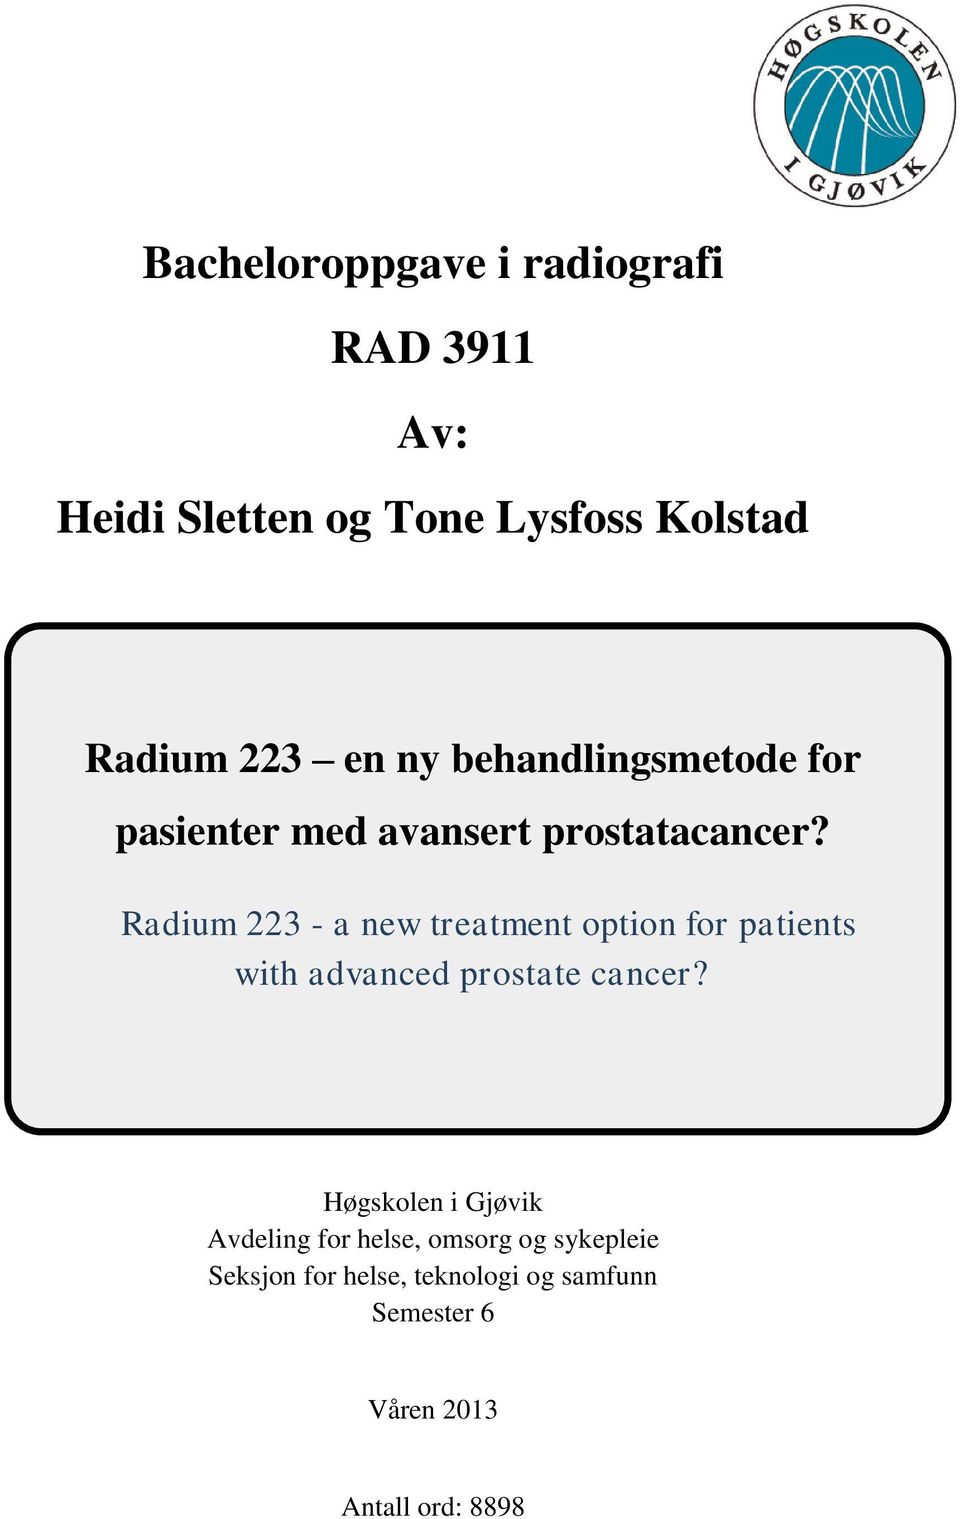 Radium 223 - a new treatment option for patients with advanced prostate cancer?